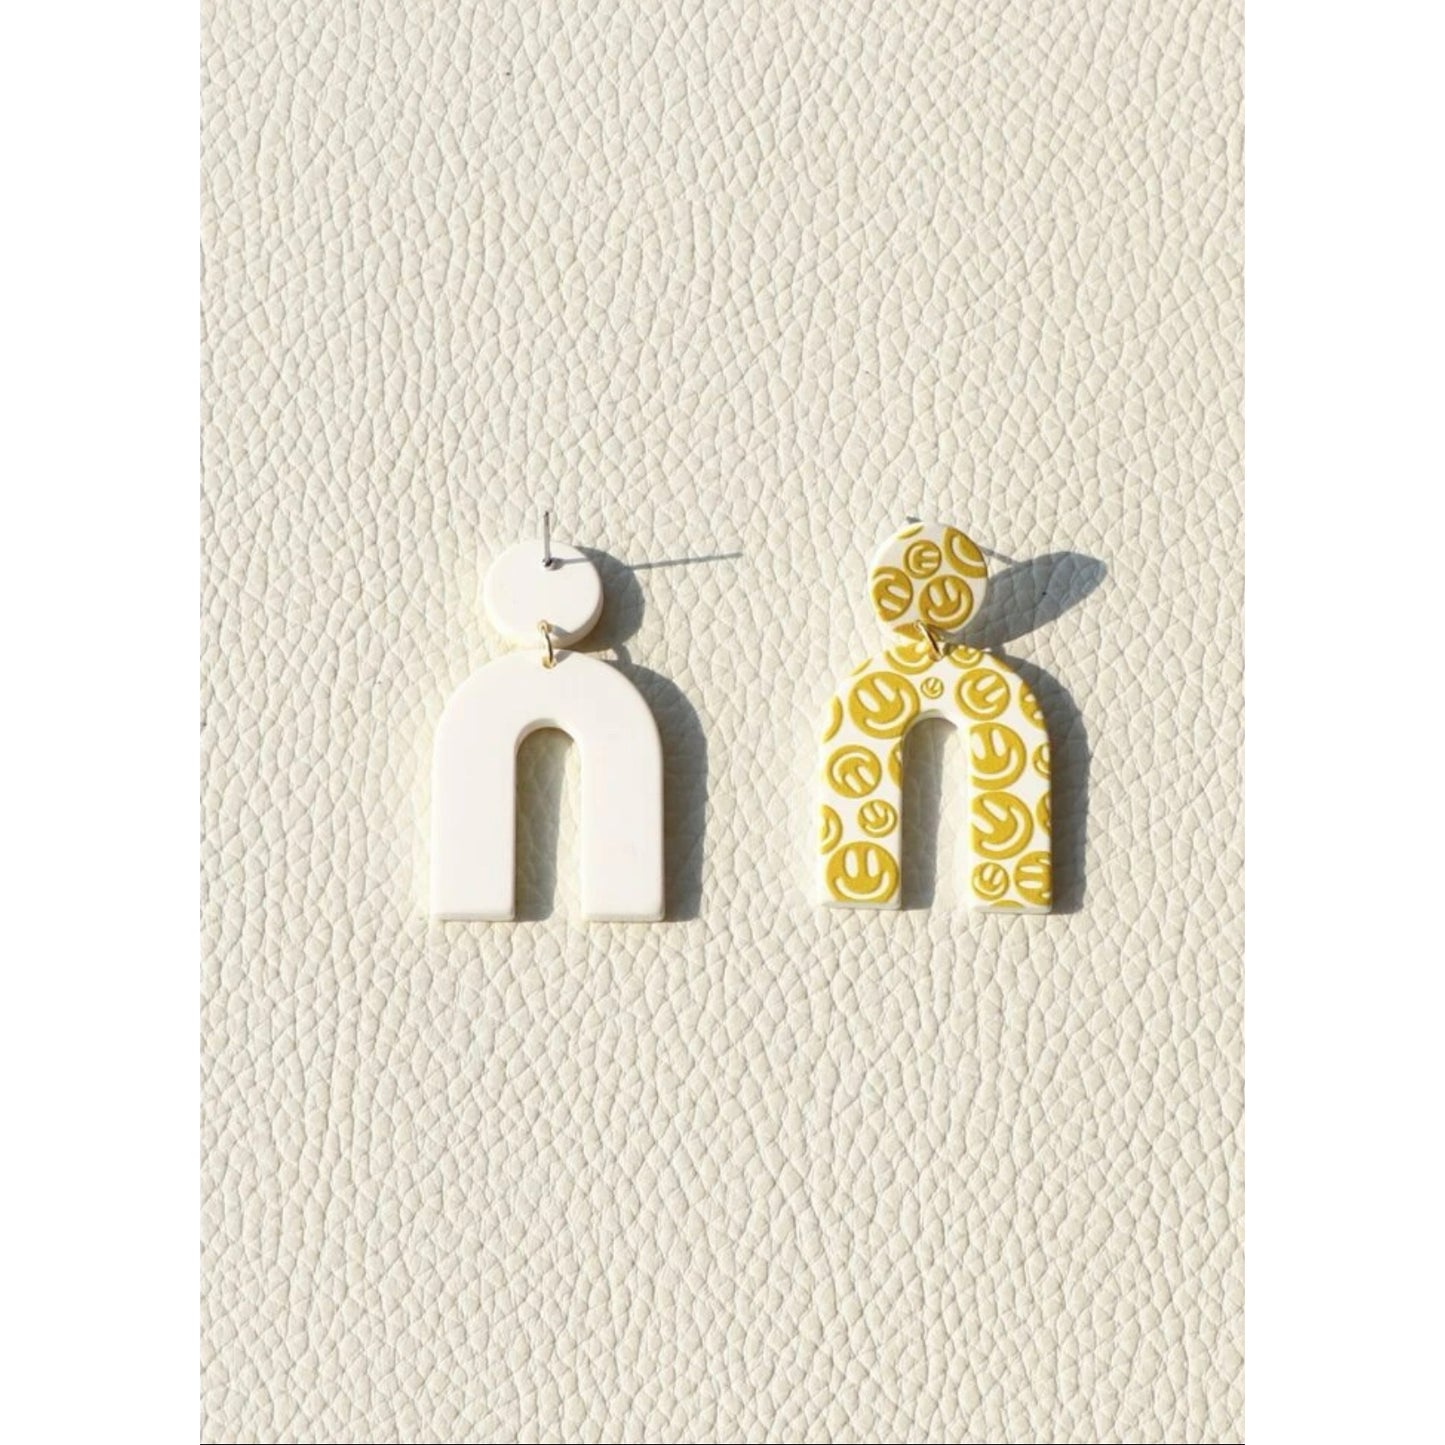 Smiley Face Arch Earrings